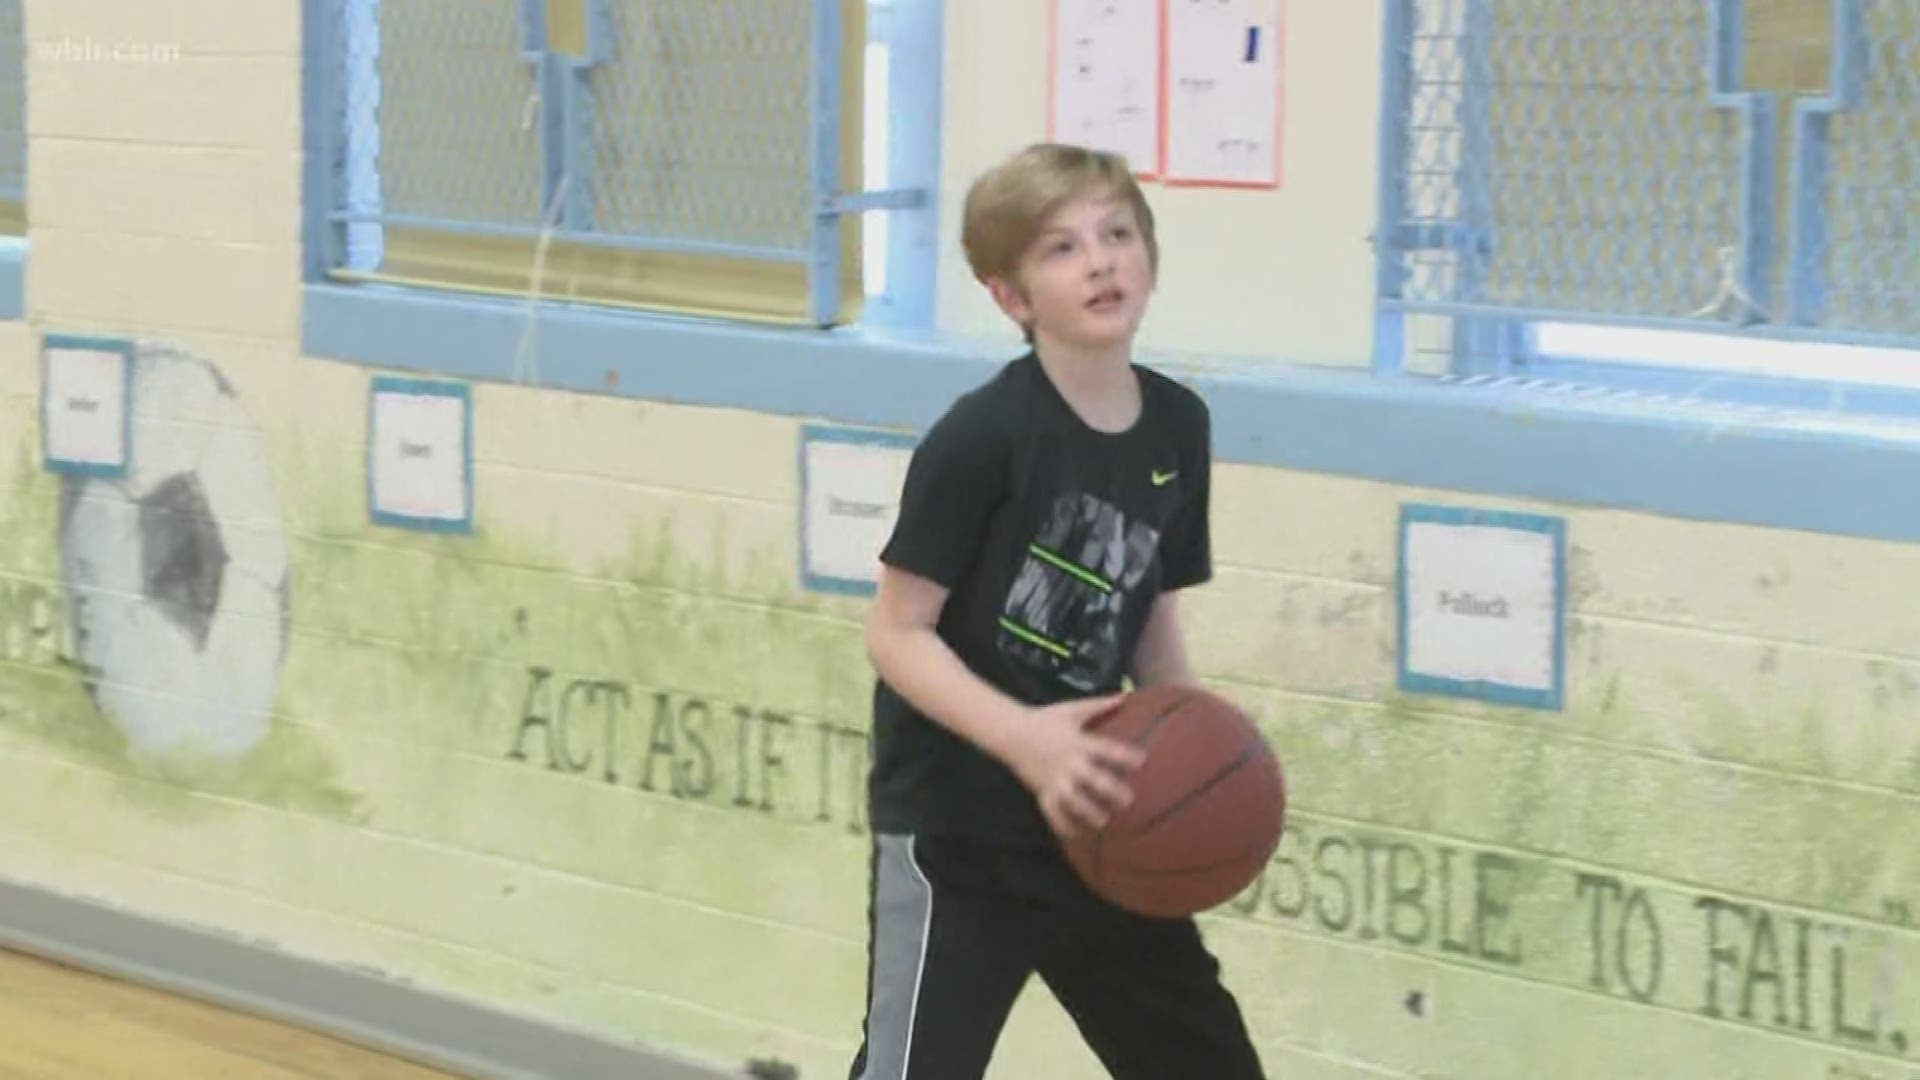 More than 100 children across East Tennessee like Carson are waiting to be matched with mentors through Big Brothers Big Sisters of East Tennessee.